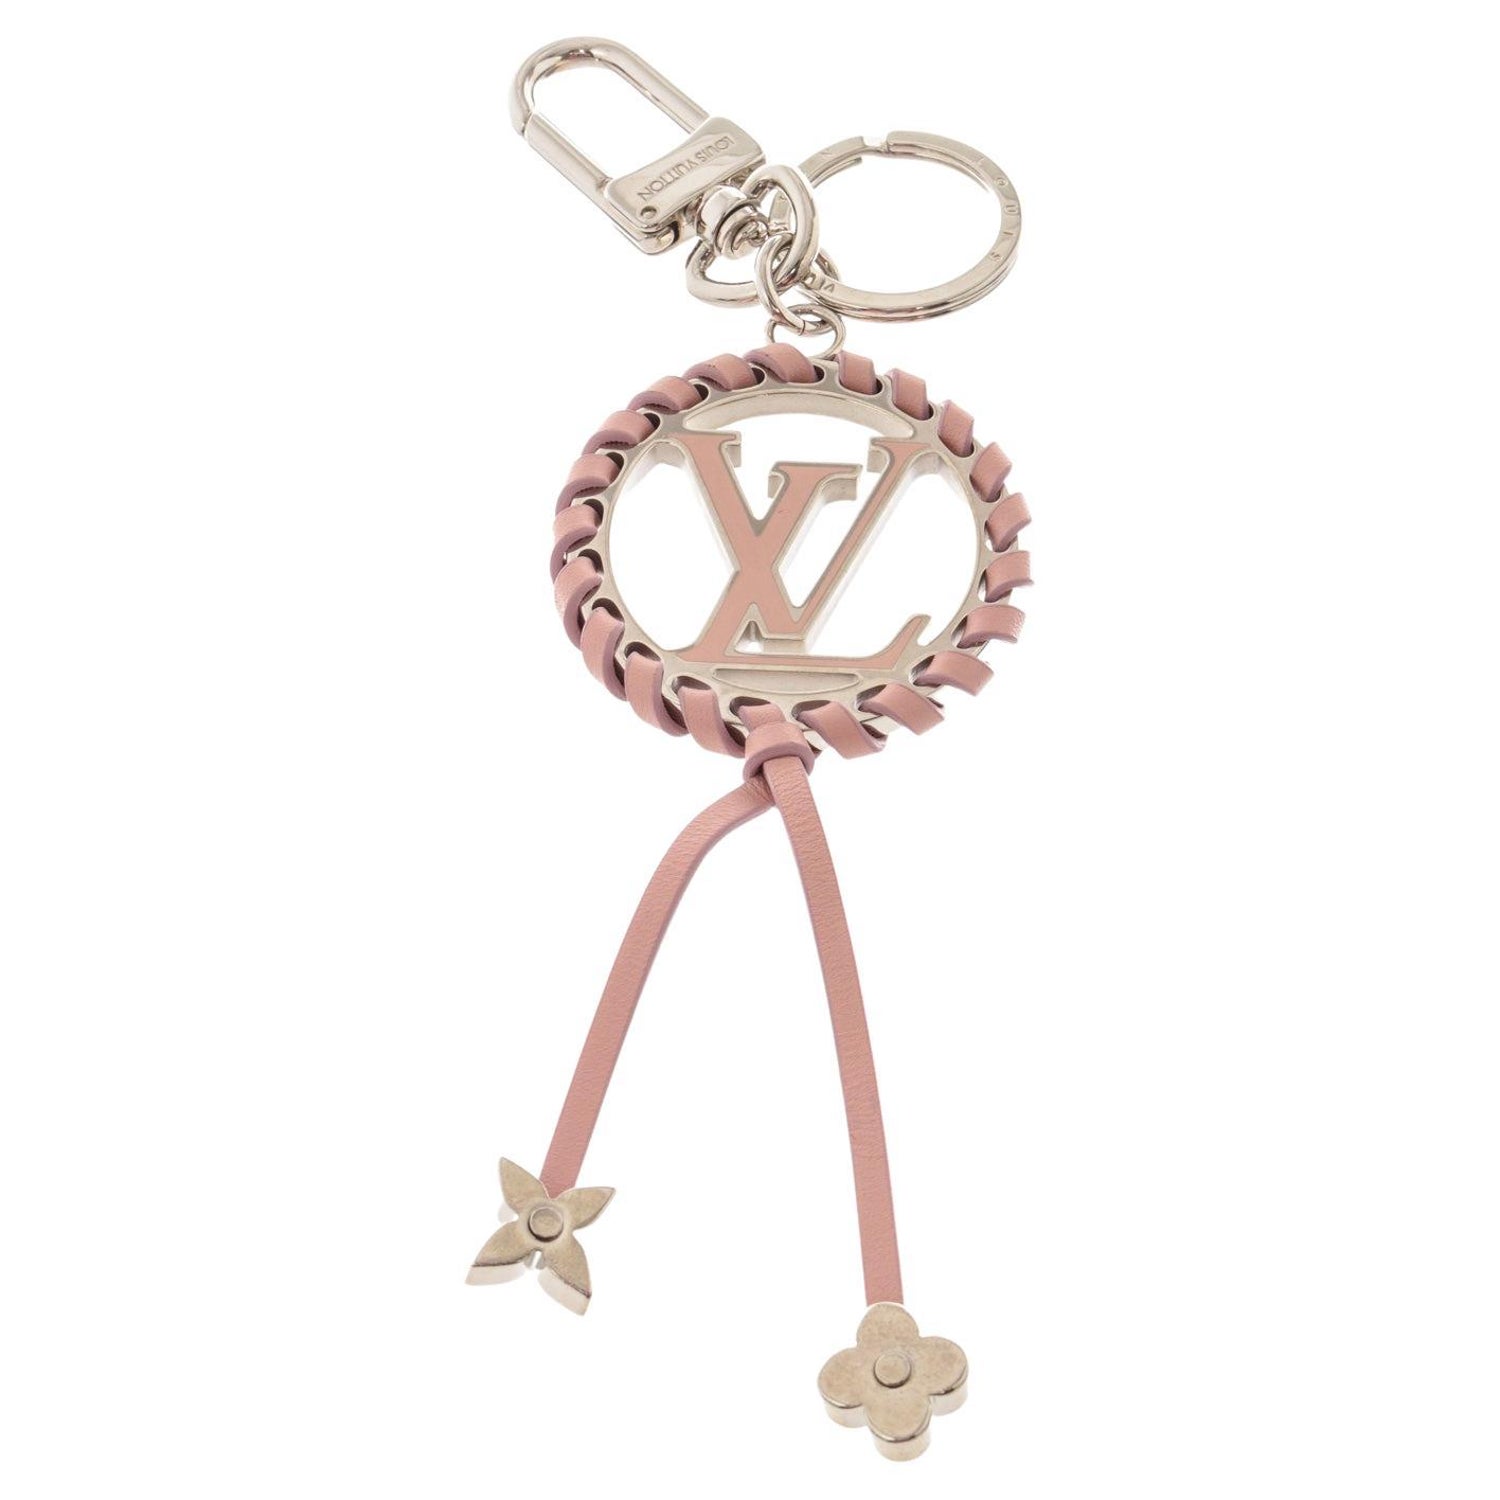 Louis Vuitton LV Plane Necklace Monogram Flower Silver in Silver Metal with  Silver-tone - US